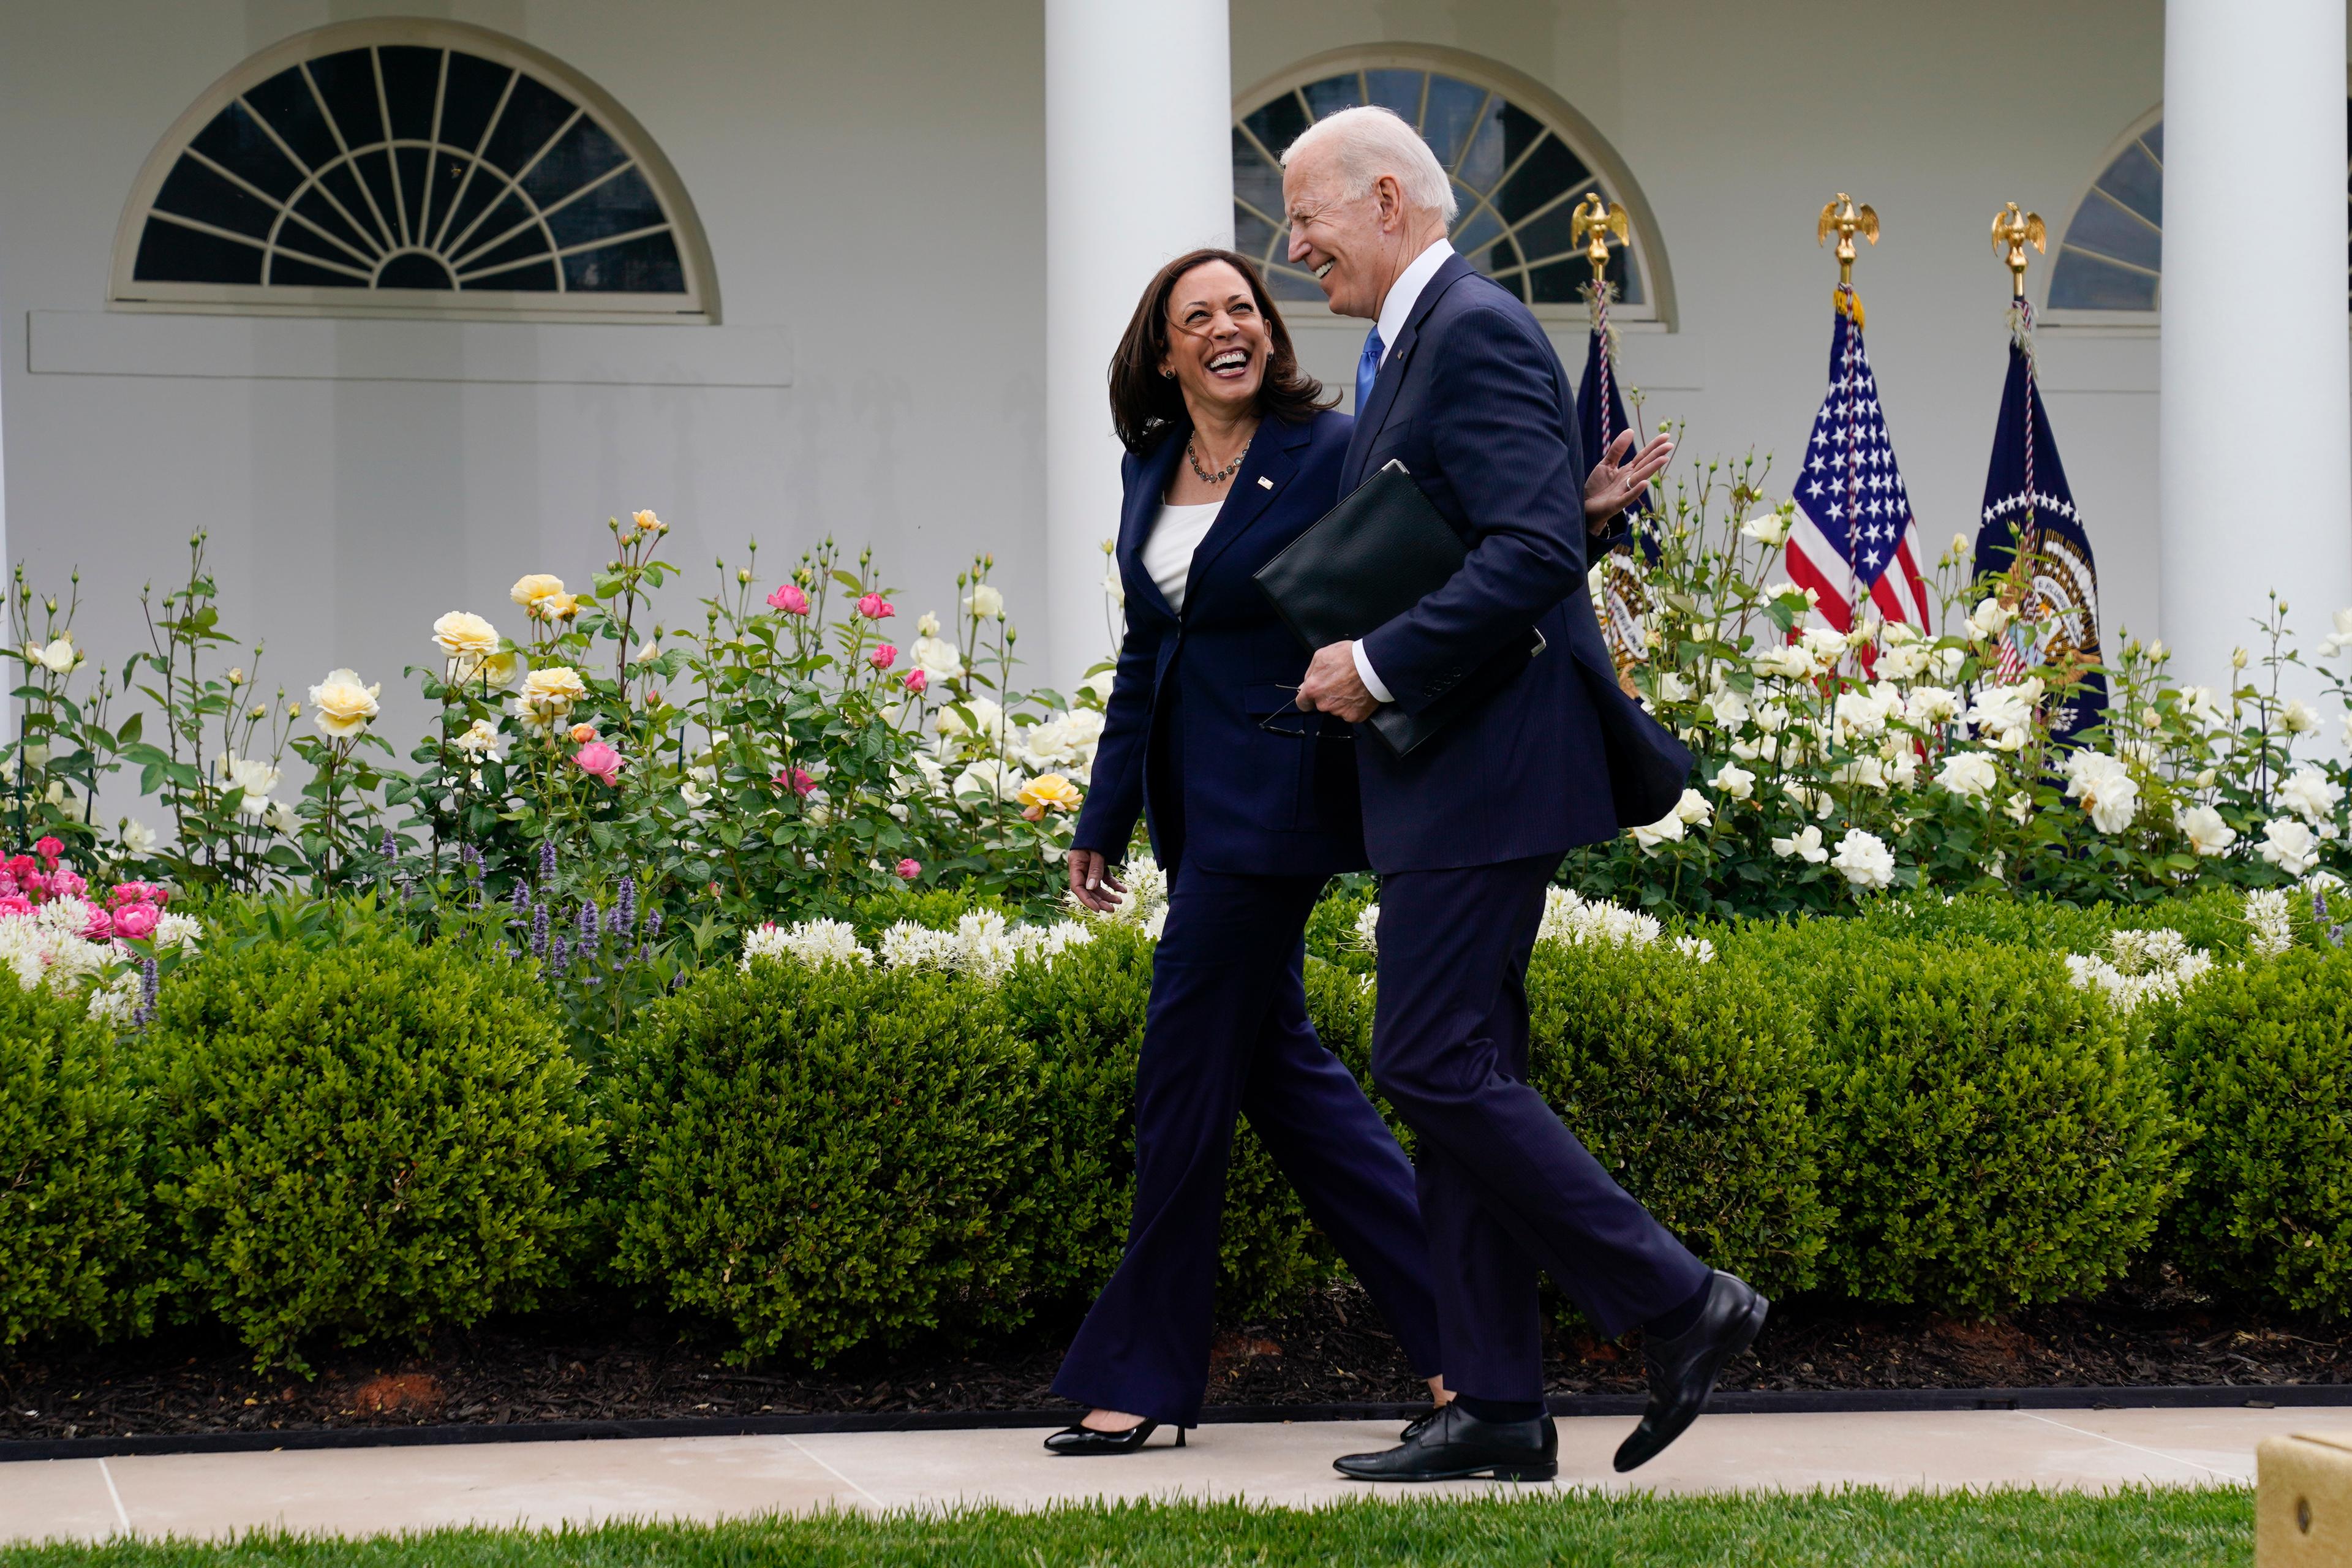 Kamala Harris pats Joe Biden on the back as the two walk at the White House Rose garden with bushes and flowers in the background.